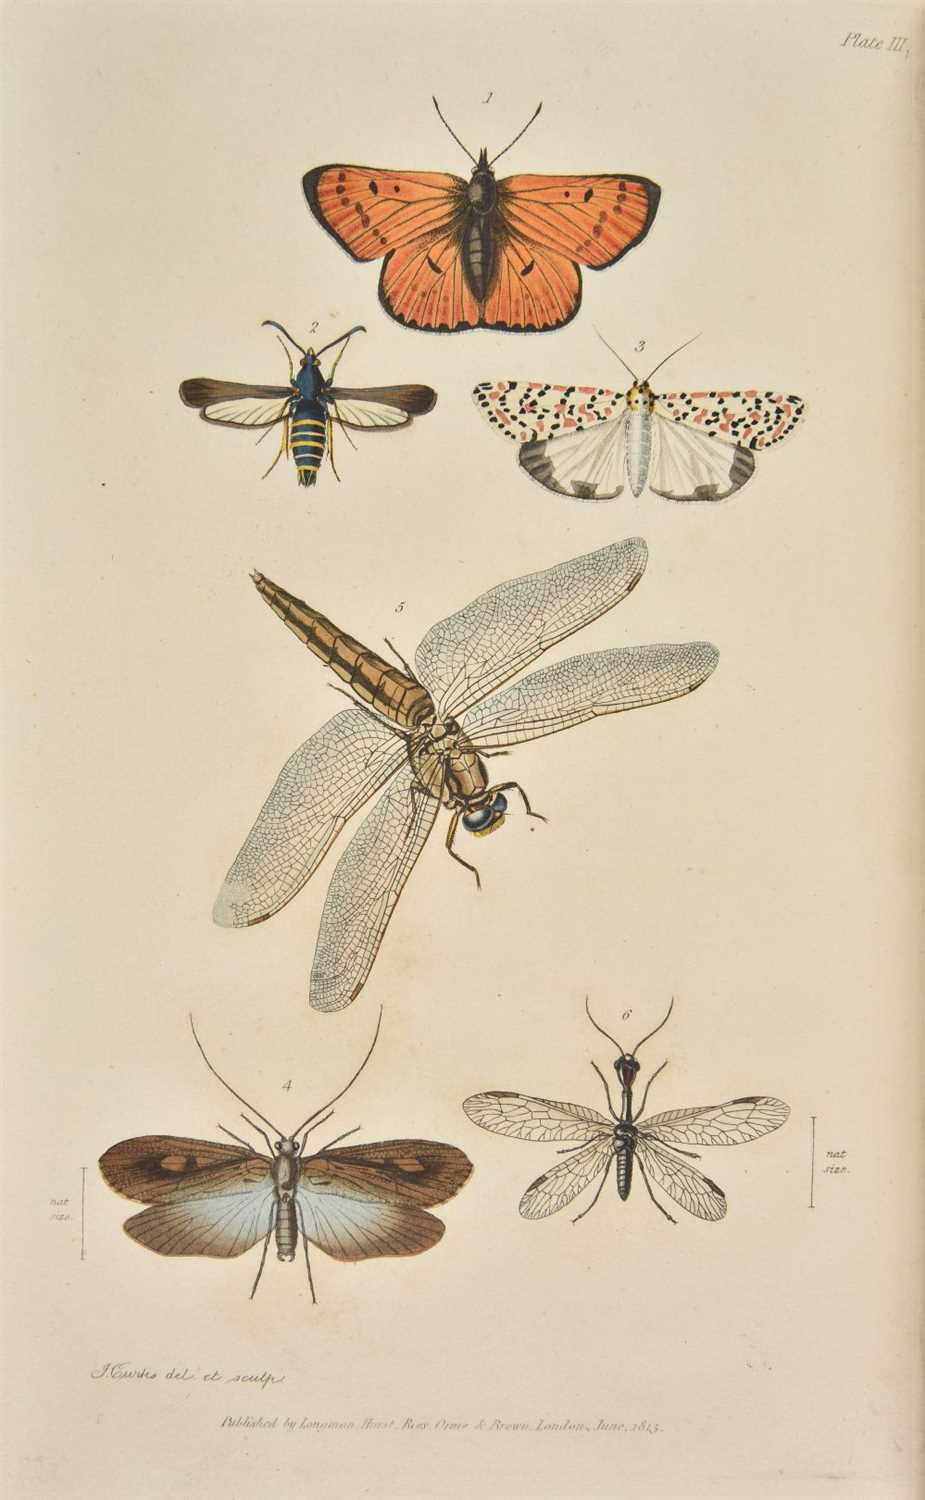 Lot 71 - Kirby (William & Spence, William). An Introduction to Entomology, 4 volumes, mixed editions, 1822-26